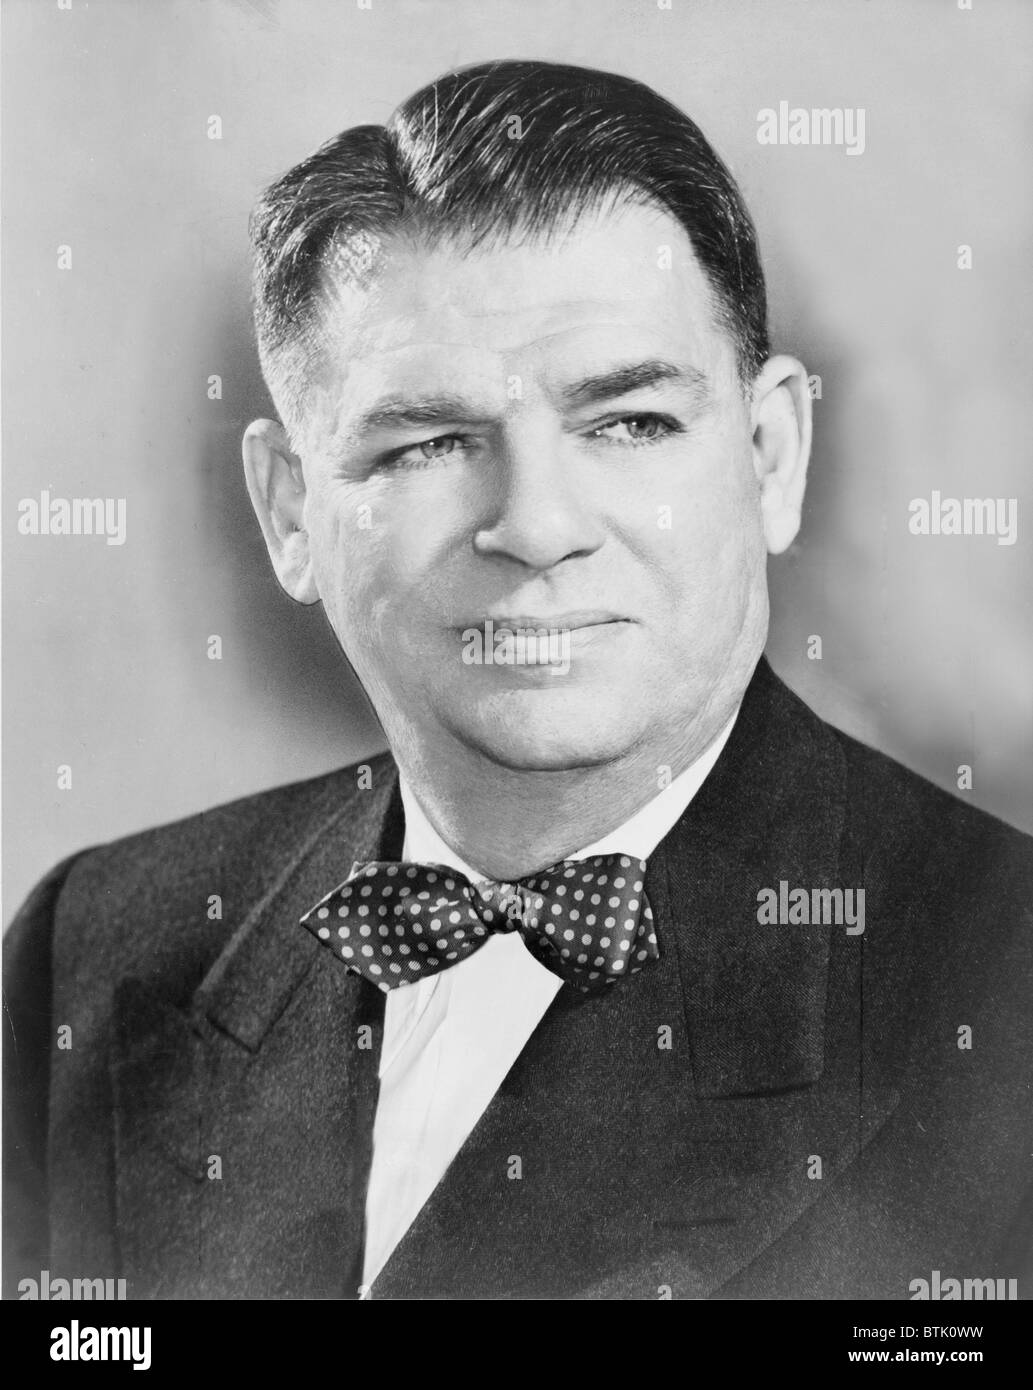 Oscar Hammerstein (1895-1960), was the lyricist to Richard Rogers' music during the golden age of the Broadway musical comedy. Stock Photo